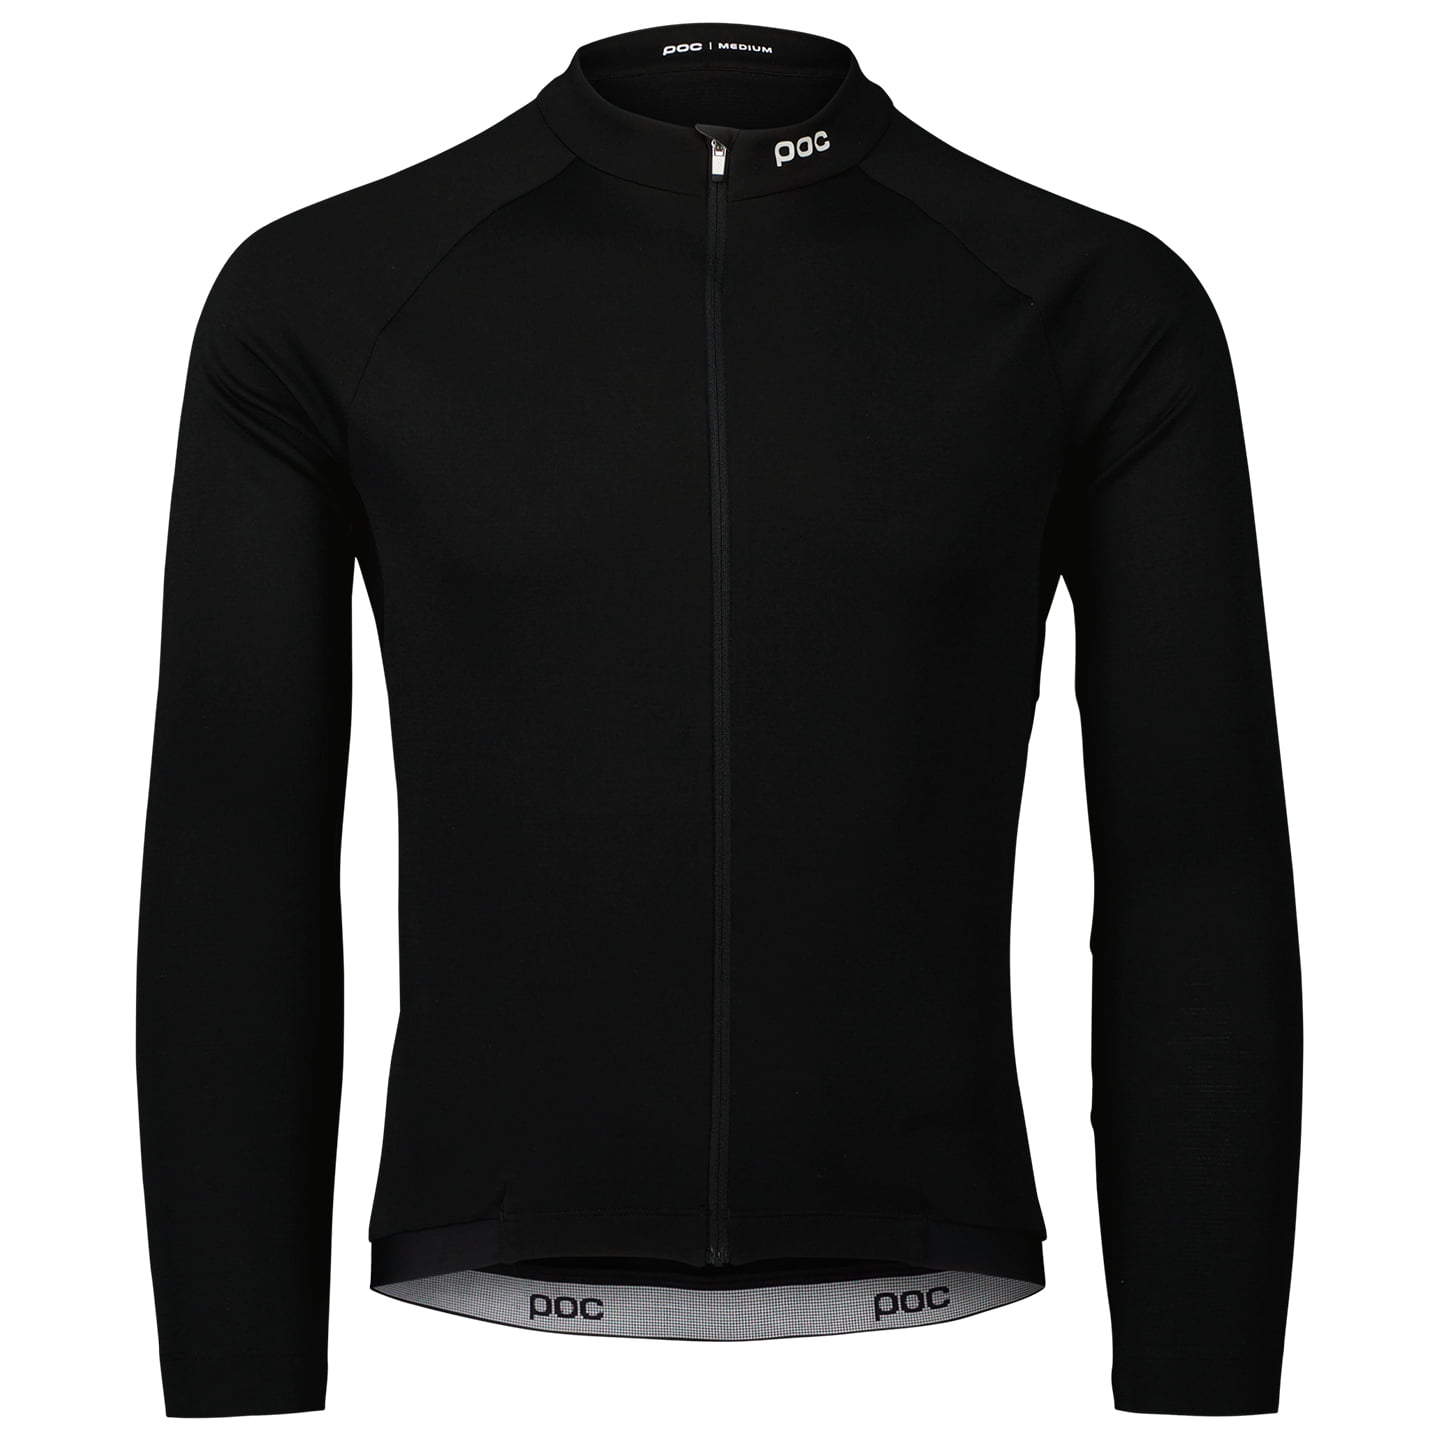 POC Thermal Lite Long Sleeve Jersey, for men, size 2XL, Cycling jersey, Cycle clothing